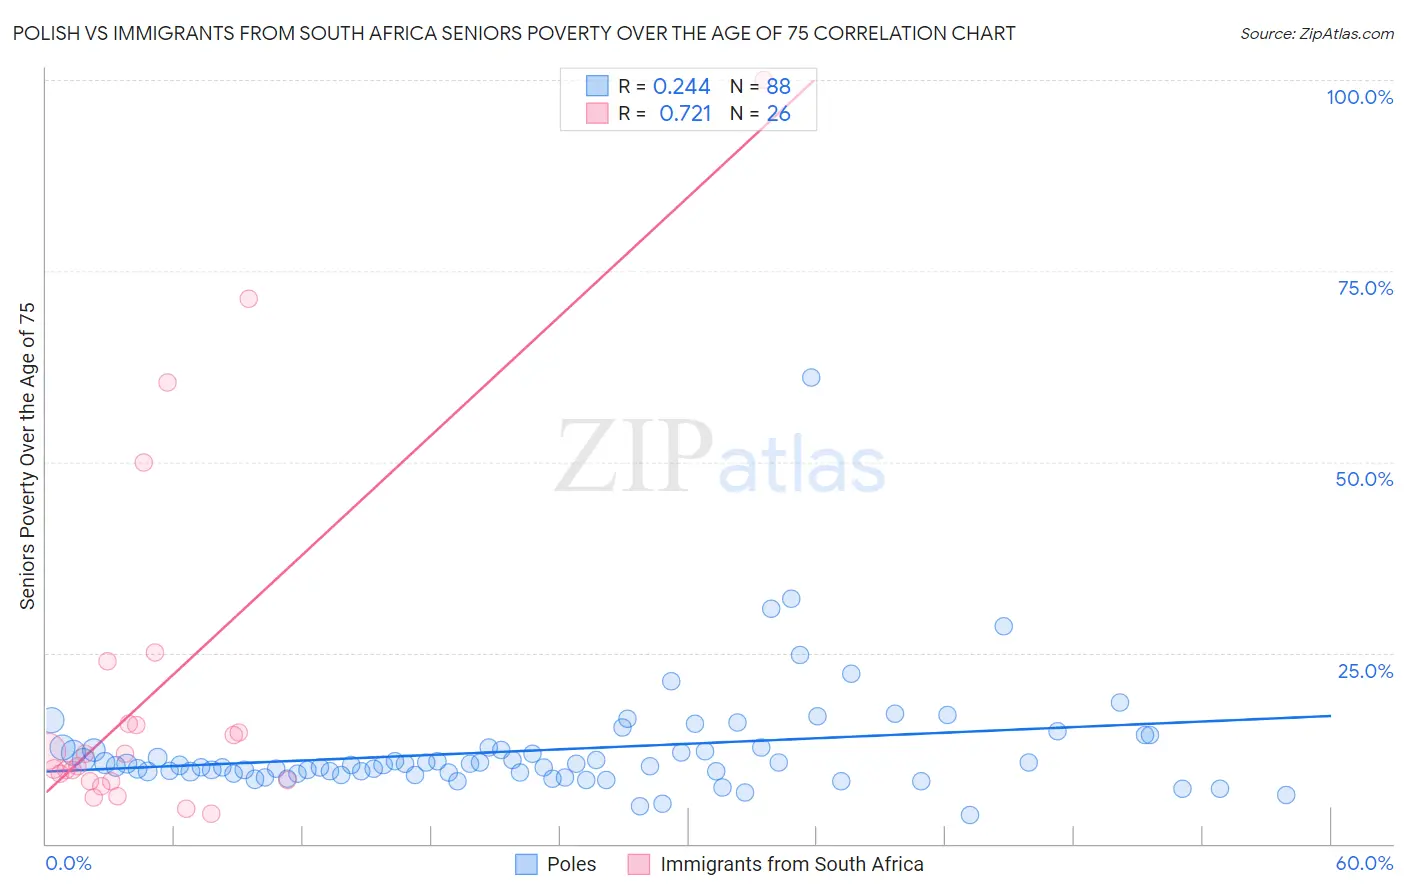 Polish vs Immigrants from South Africa Seniors Poverty Over the Age of 75